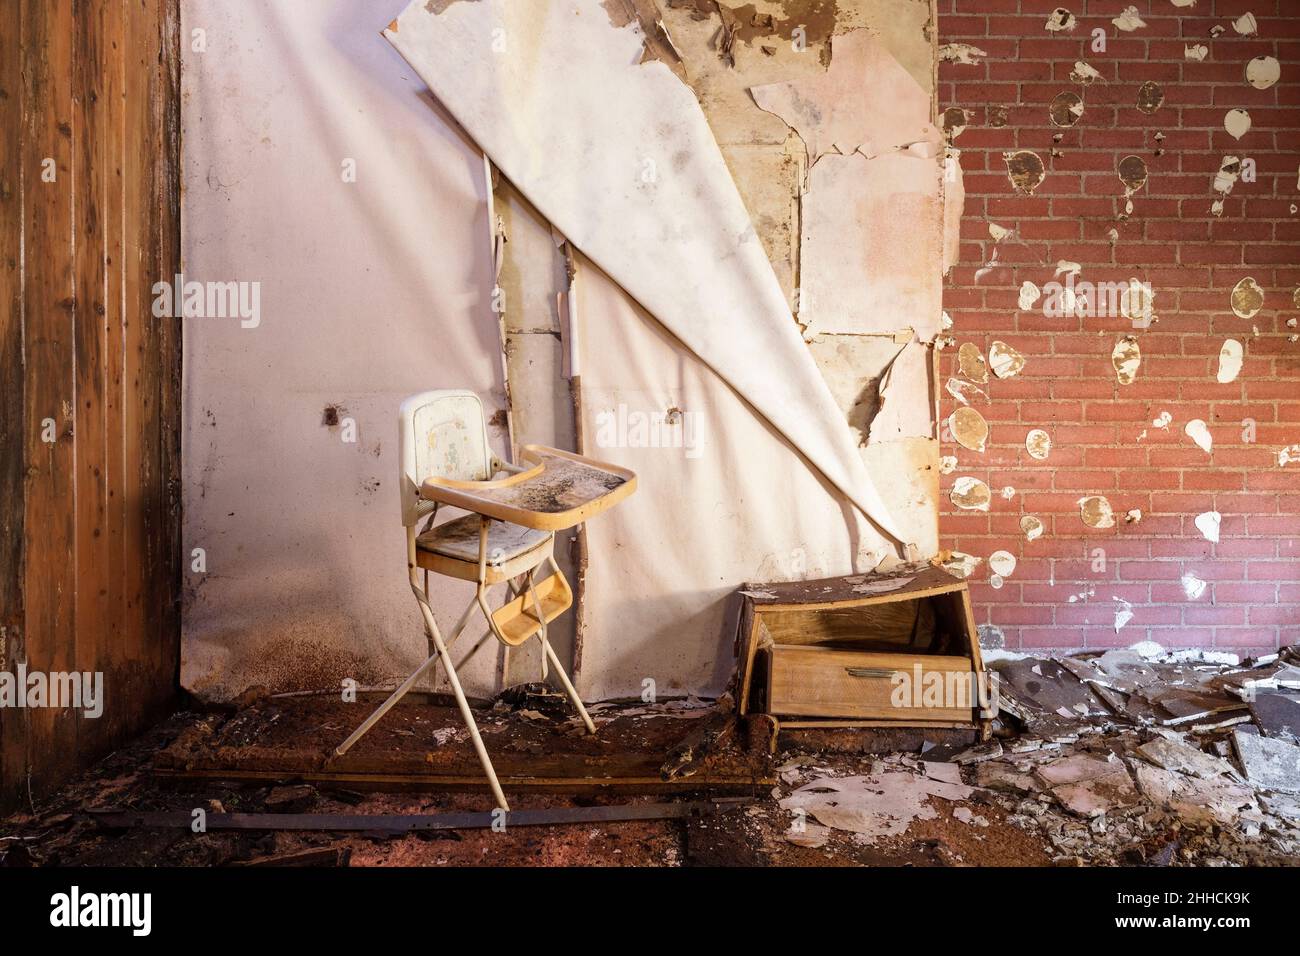 A high chair and a bedside table rotten and falling apart inside an abandoned motel room. Stock Photo